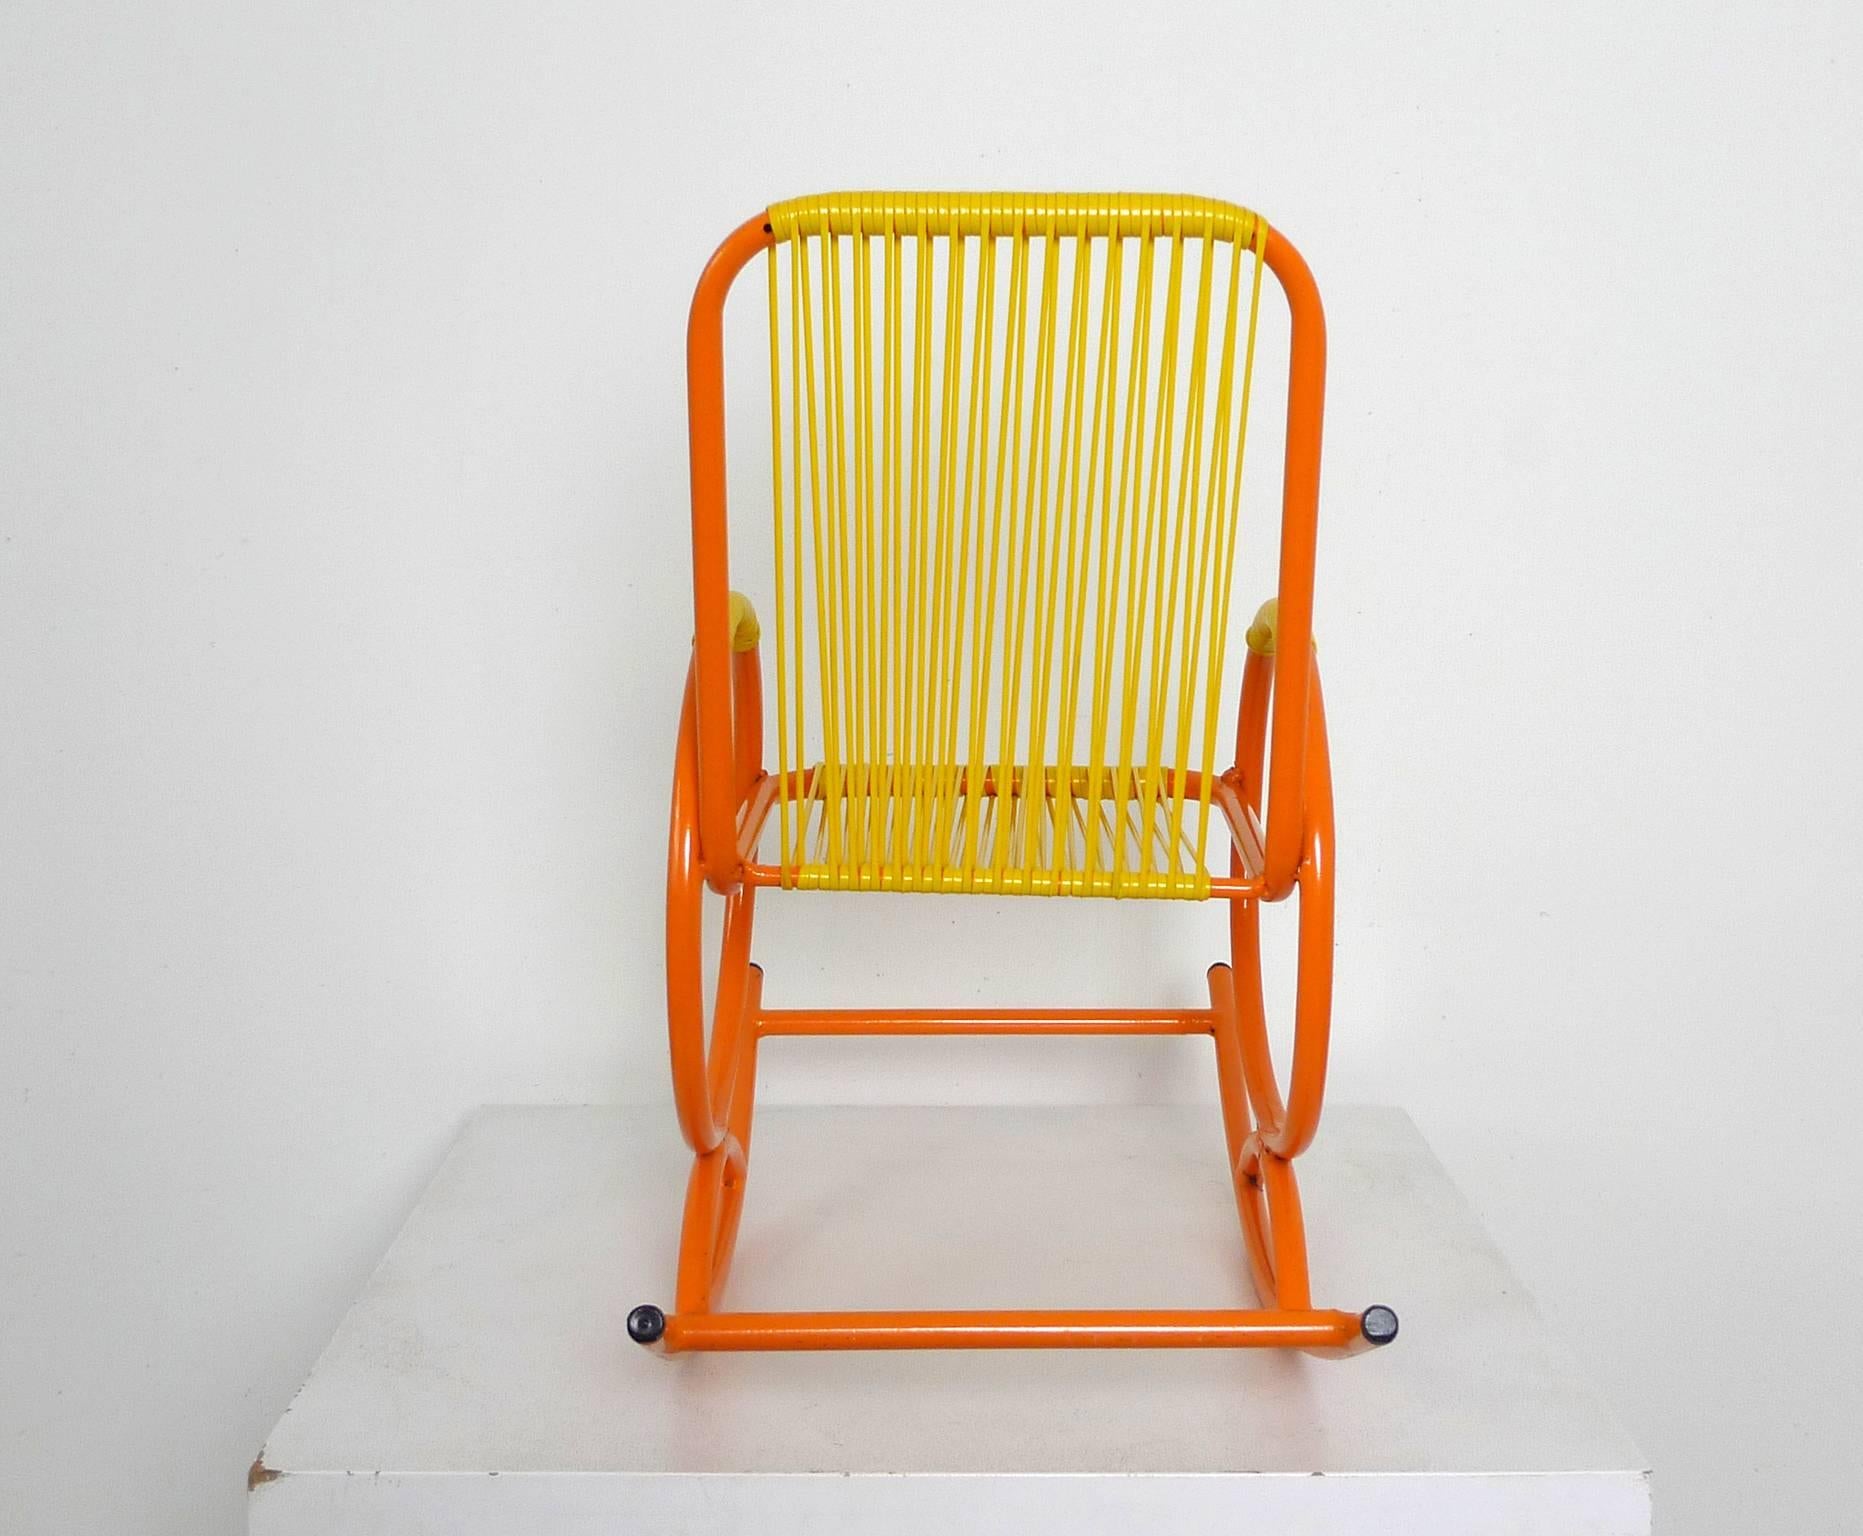 20th Century 1950s Rocking Chair for Children from Italy